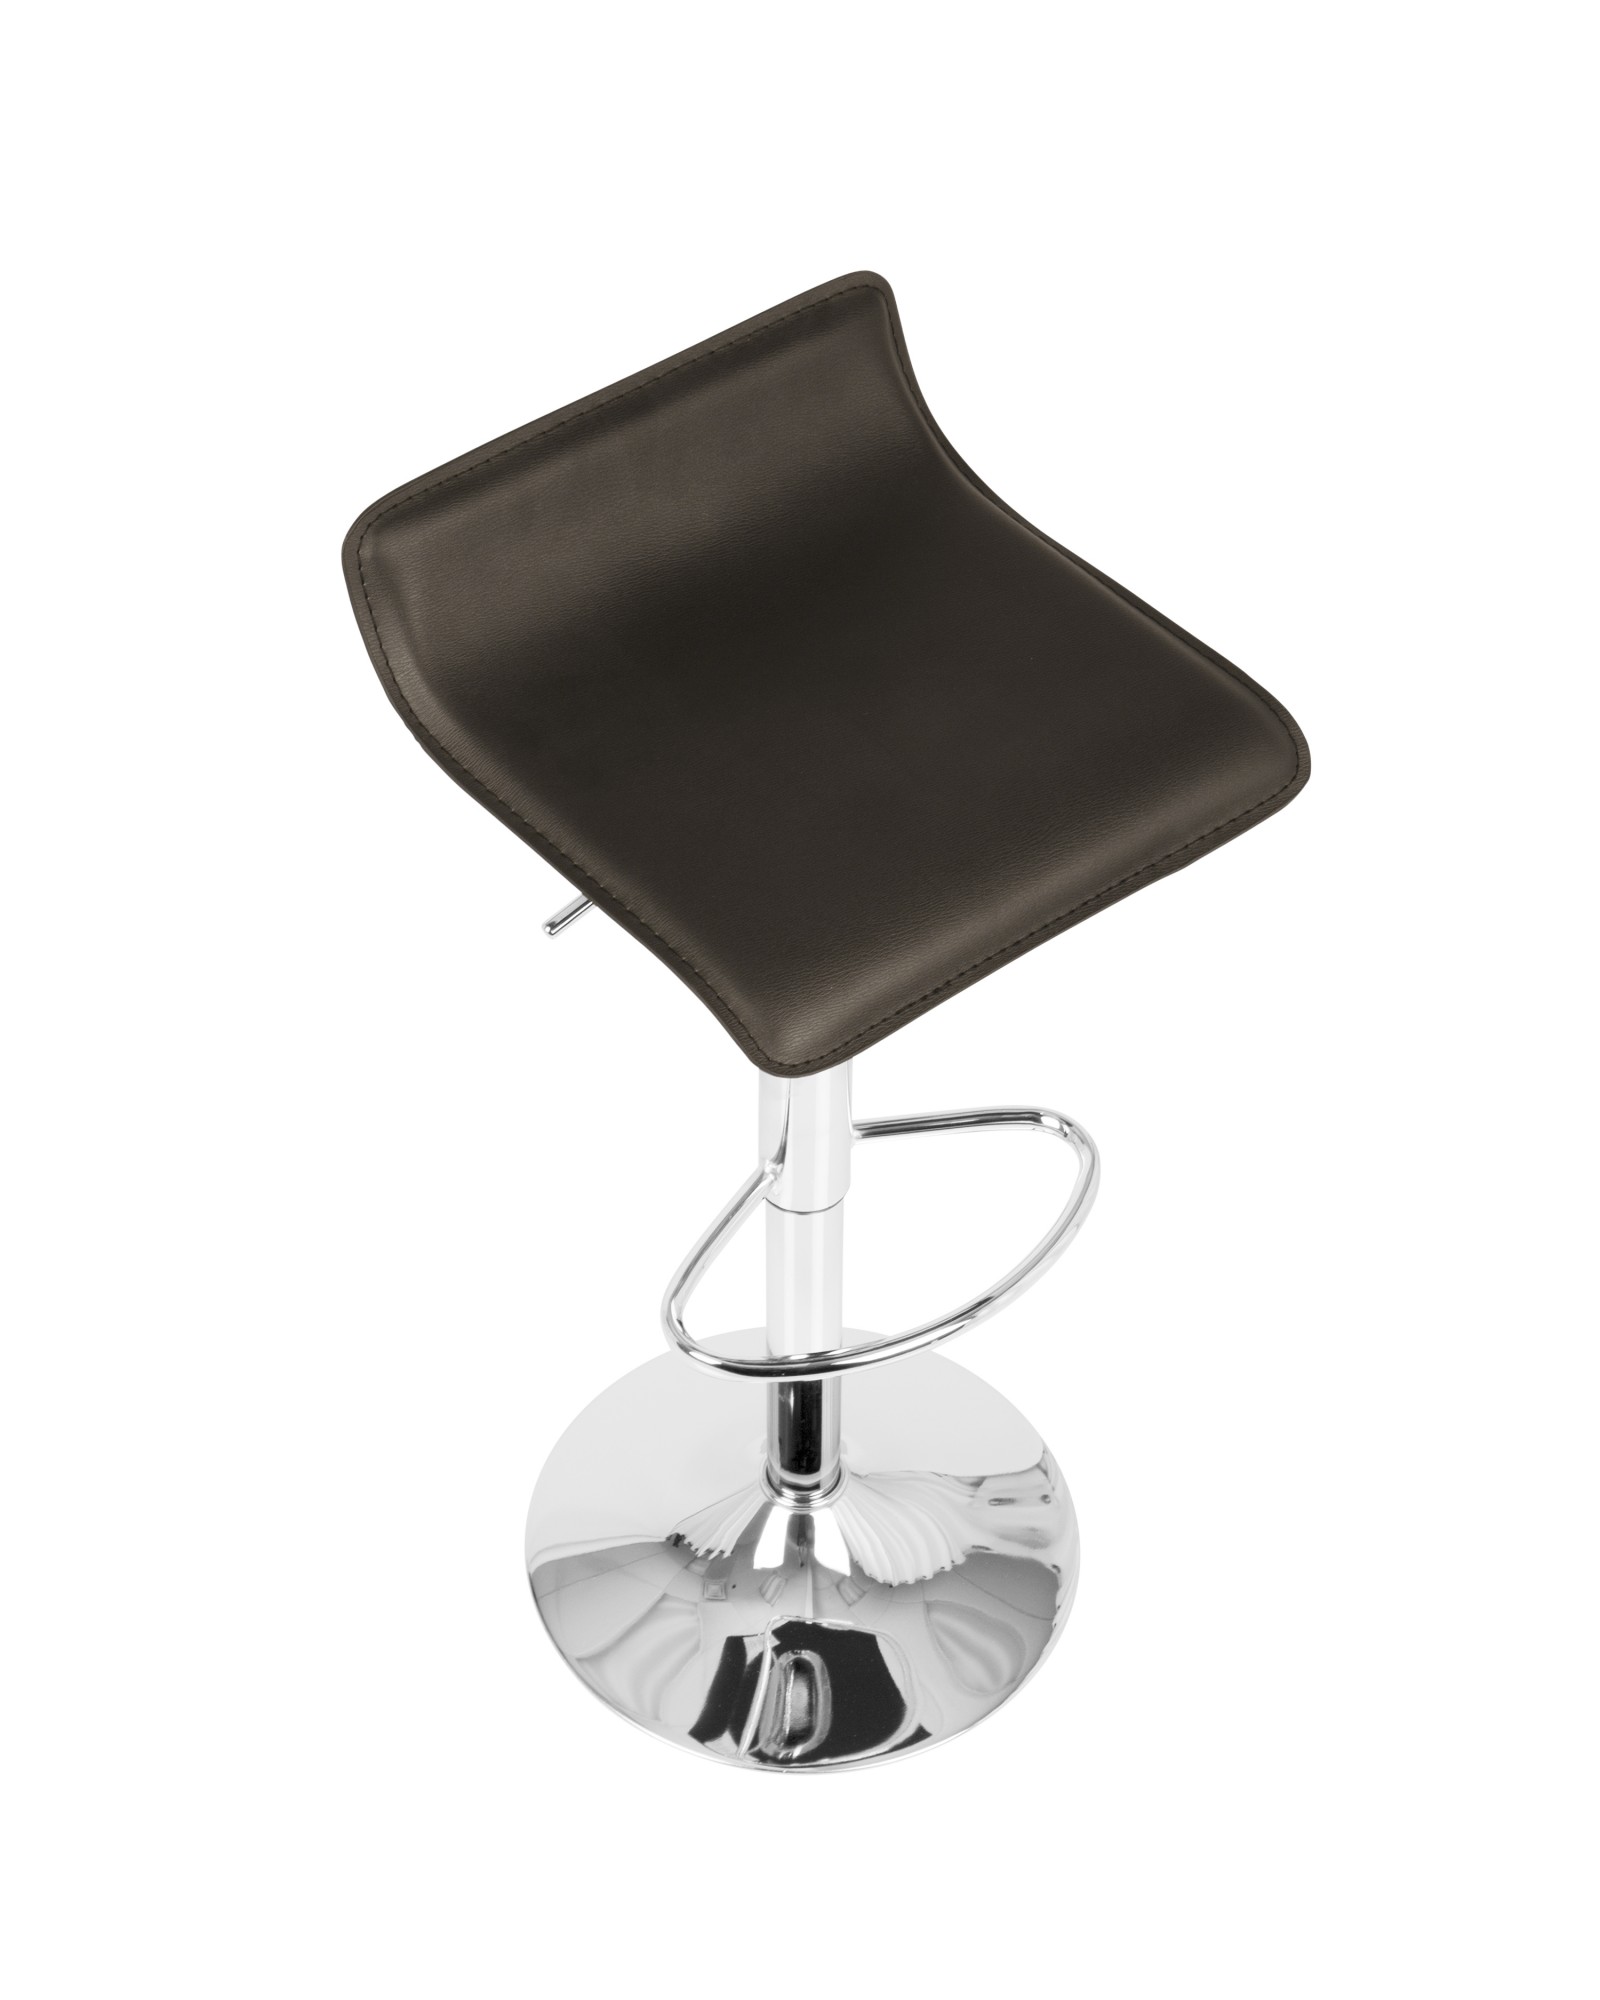 Ale Contemporary Adjustable Barstool in Brown PU Leather - Set of 2